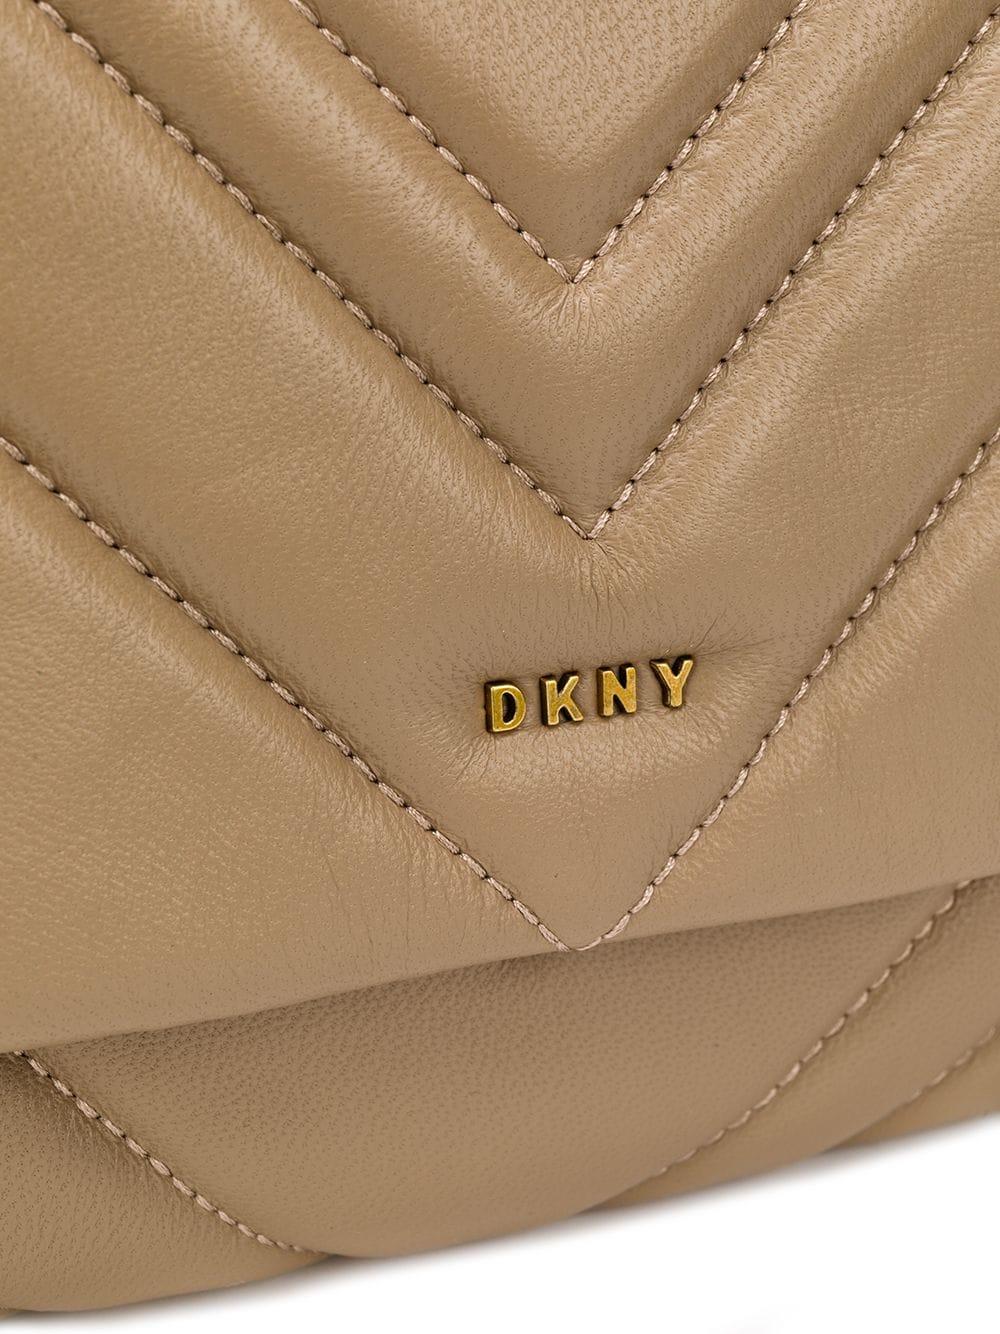 DKNY Vivian Quilted Crossbody Bag in Natural | Lyst